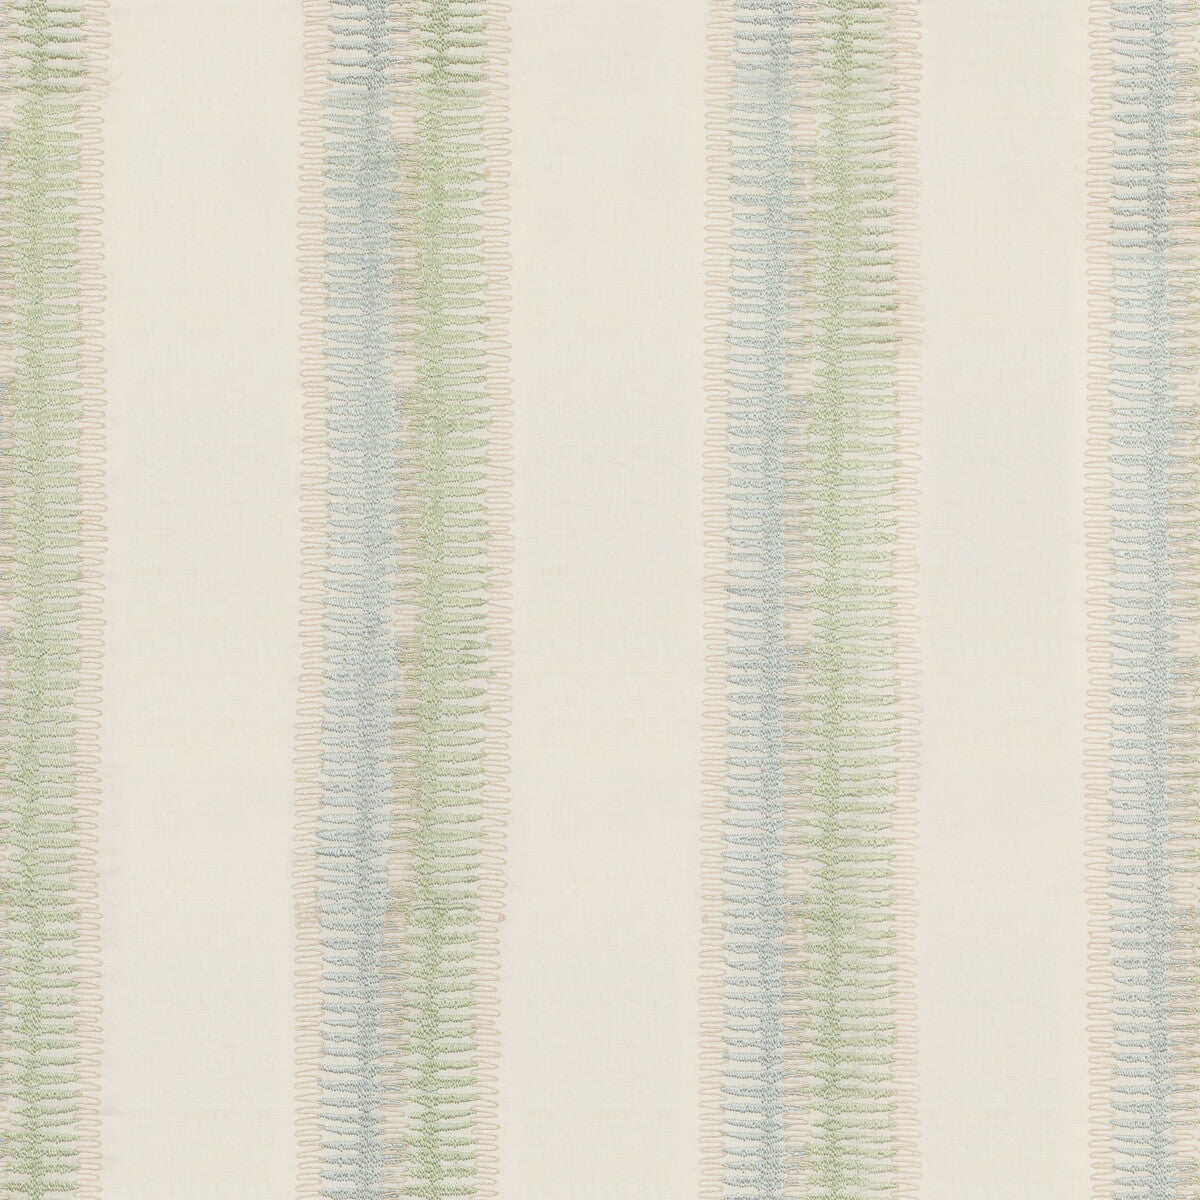 Tamar fabric in aqua color - pattern BF10801.1.0 - by G P &amp; J Baker in the Artisan II collection